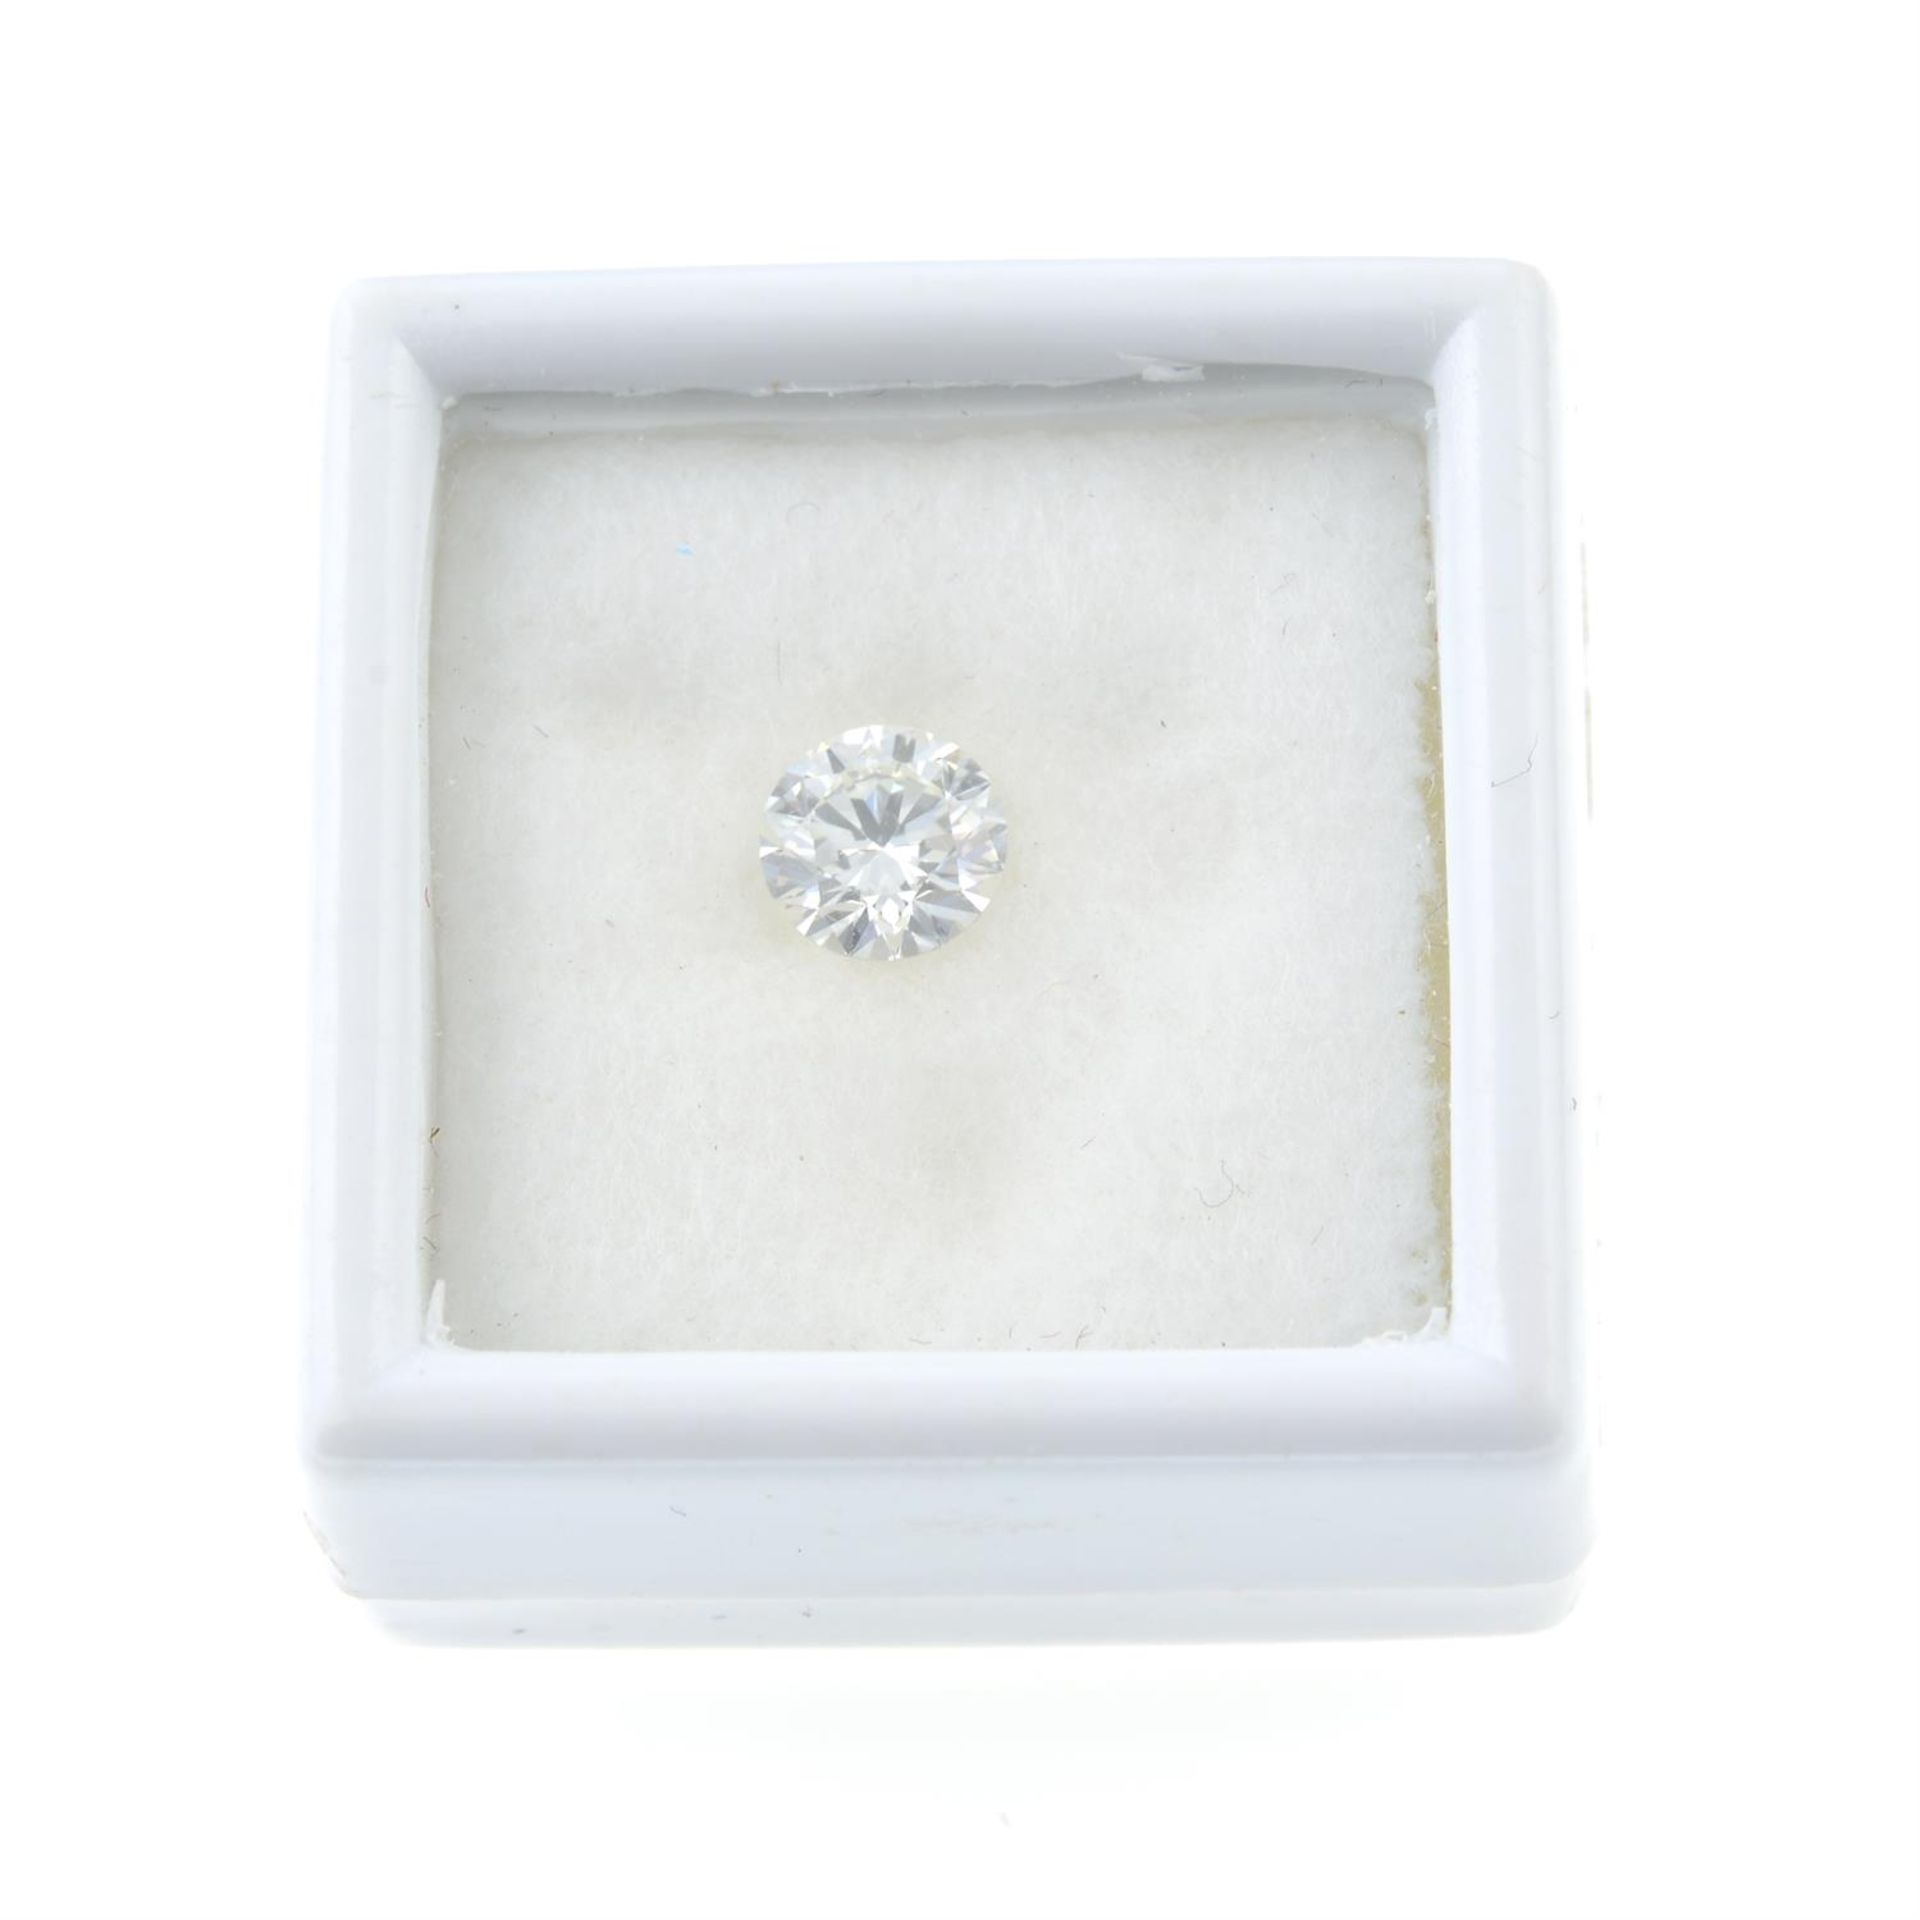 A round brilliant-cut diamond, approximate weight 0.55ct. - Image 3 of 3